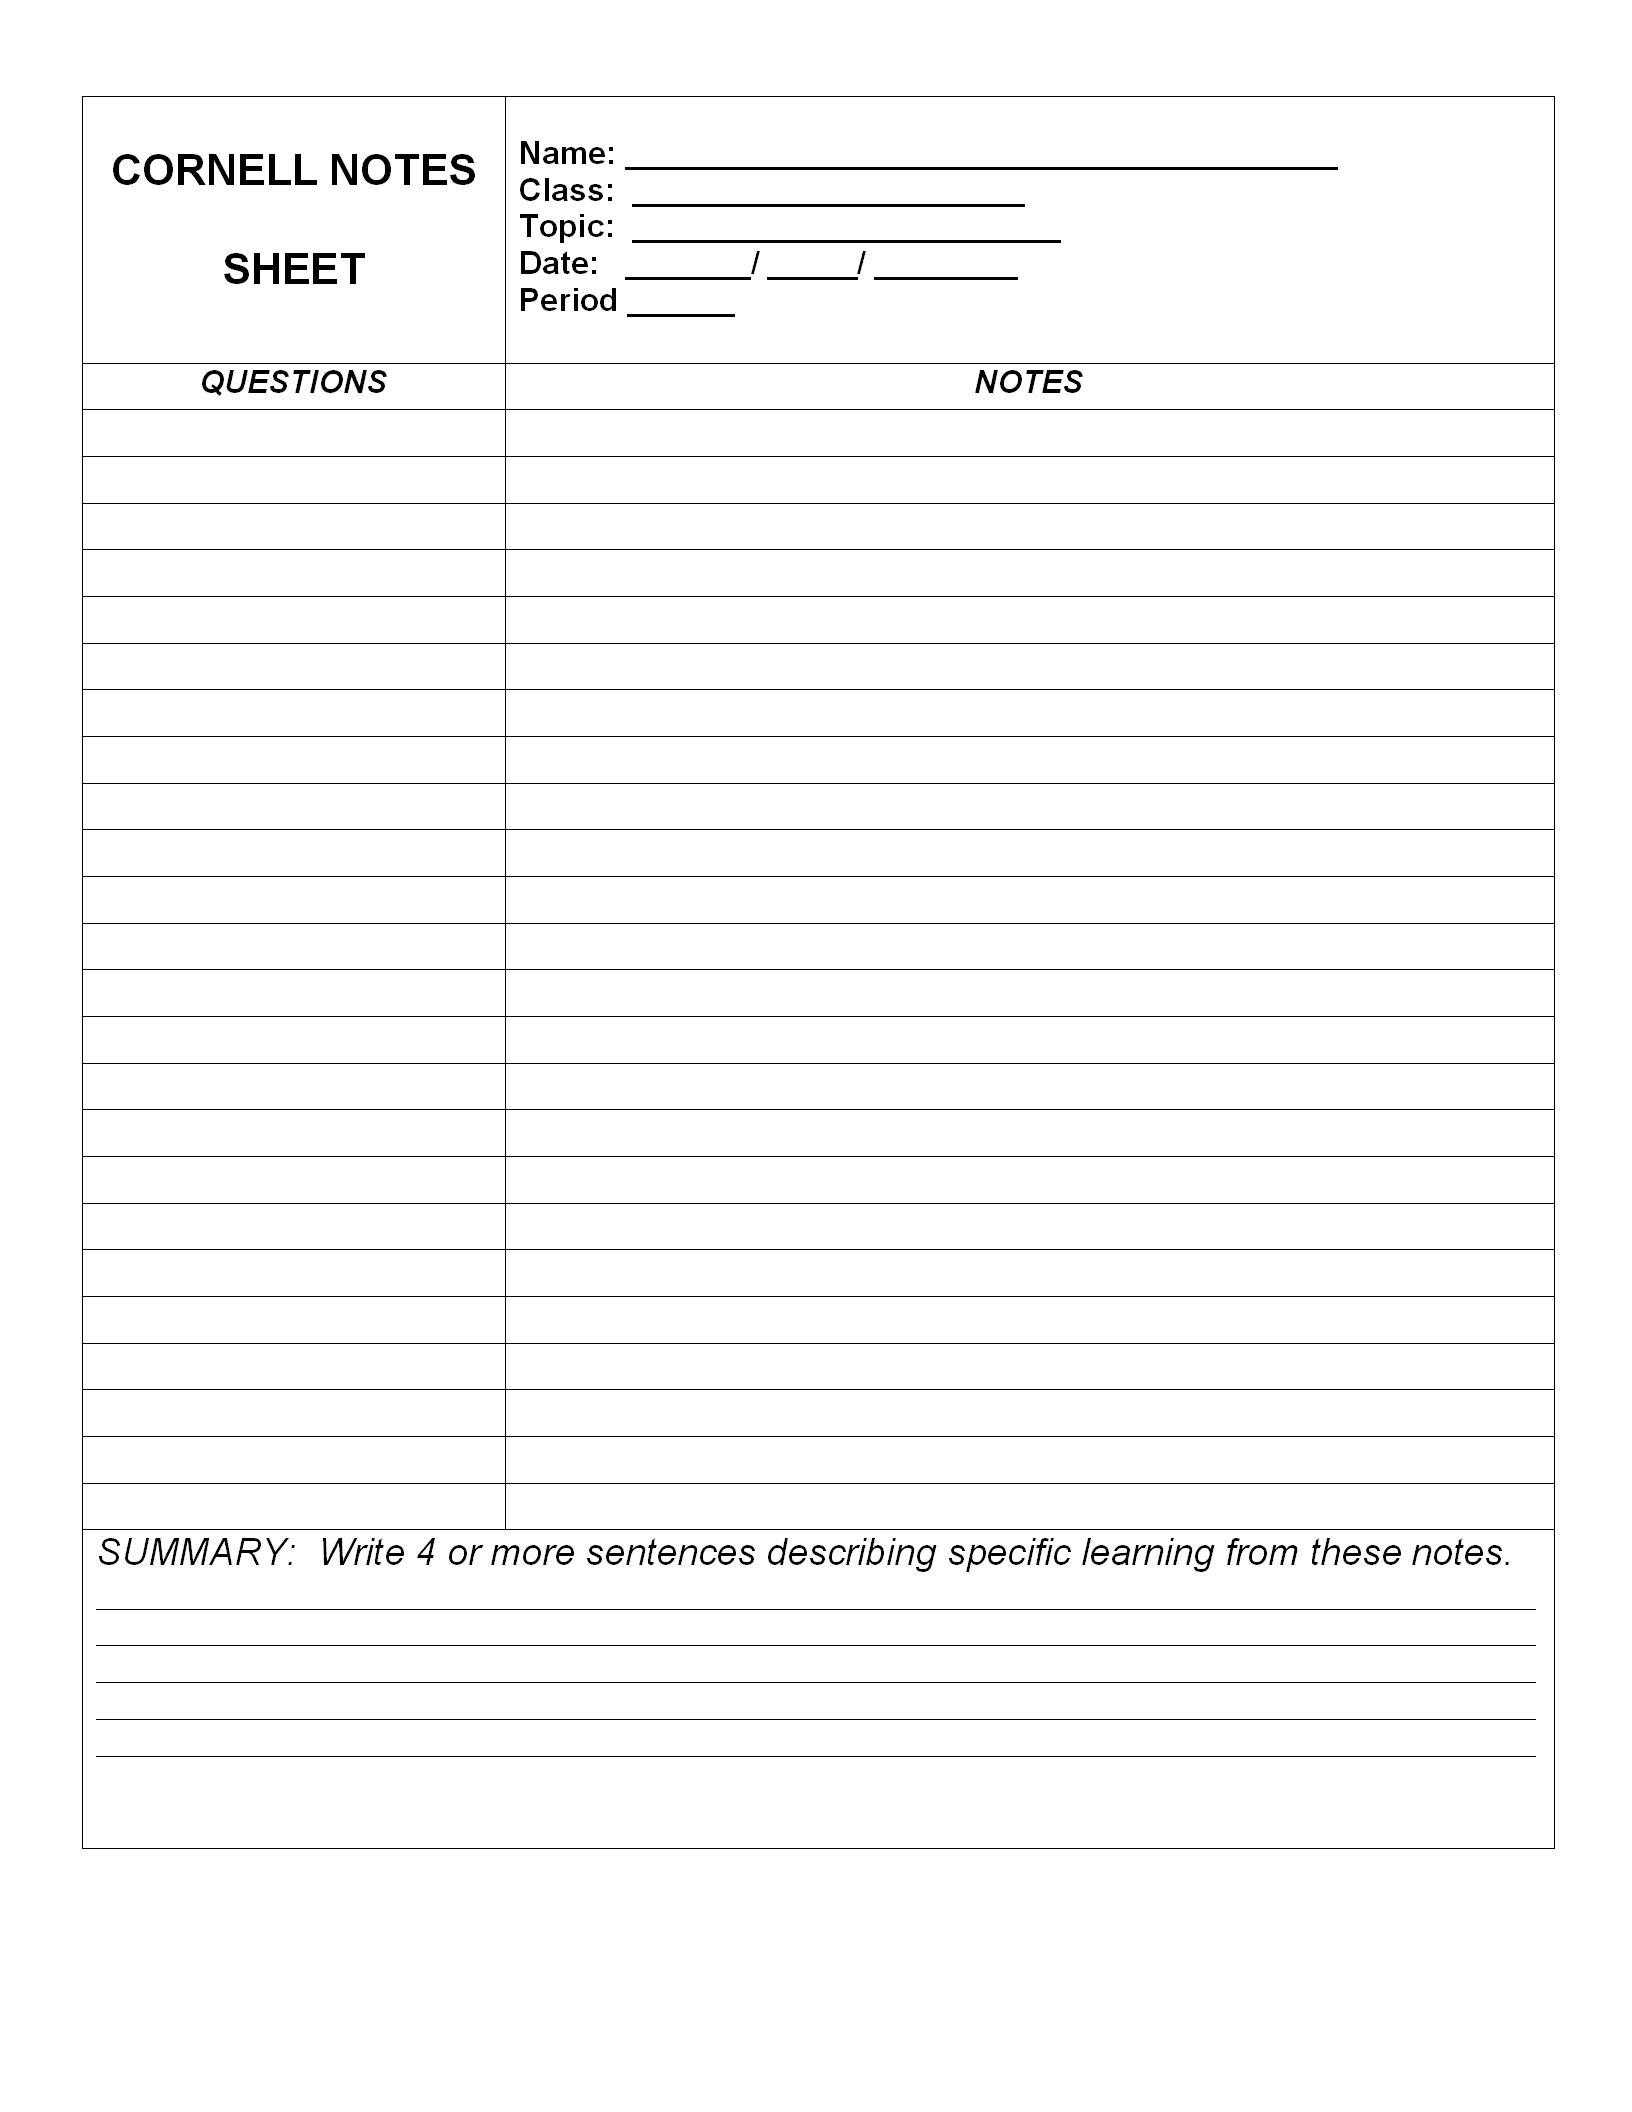 Wps Template – Free Download Writer, Presentation Within Cornell Notes Template Doc